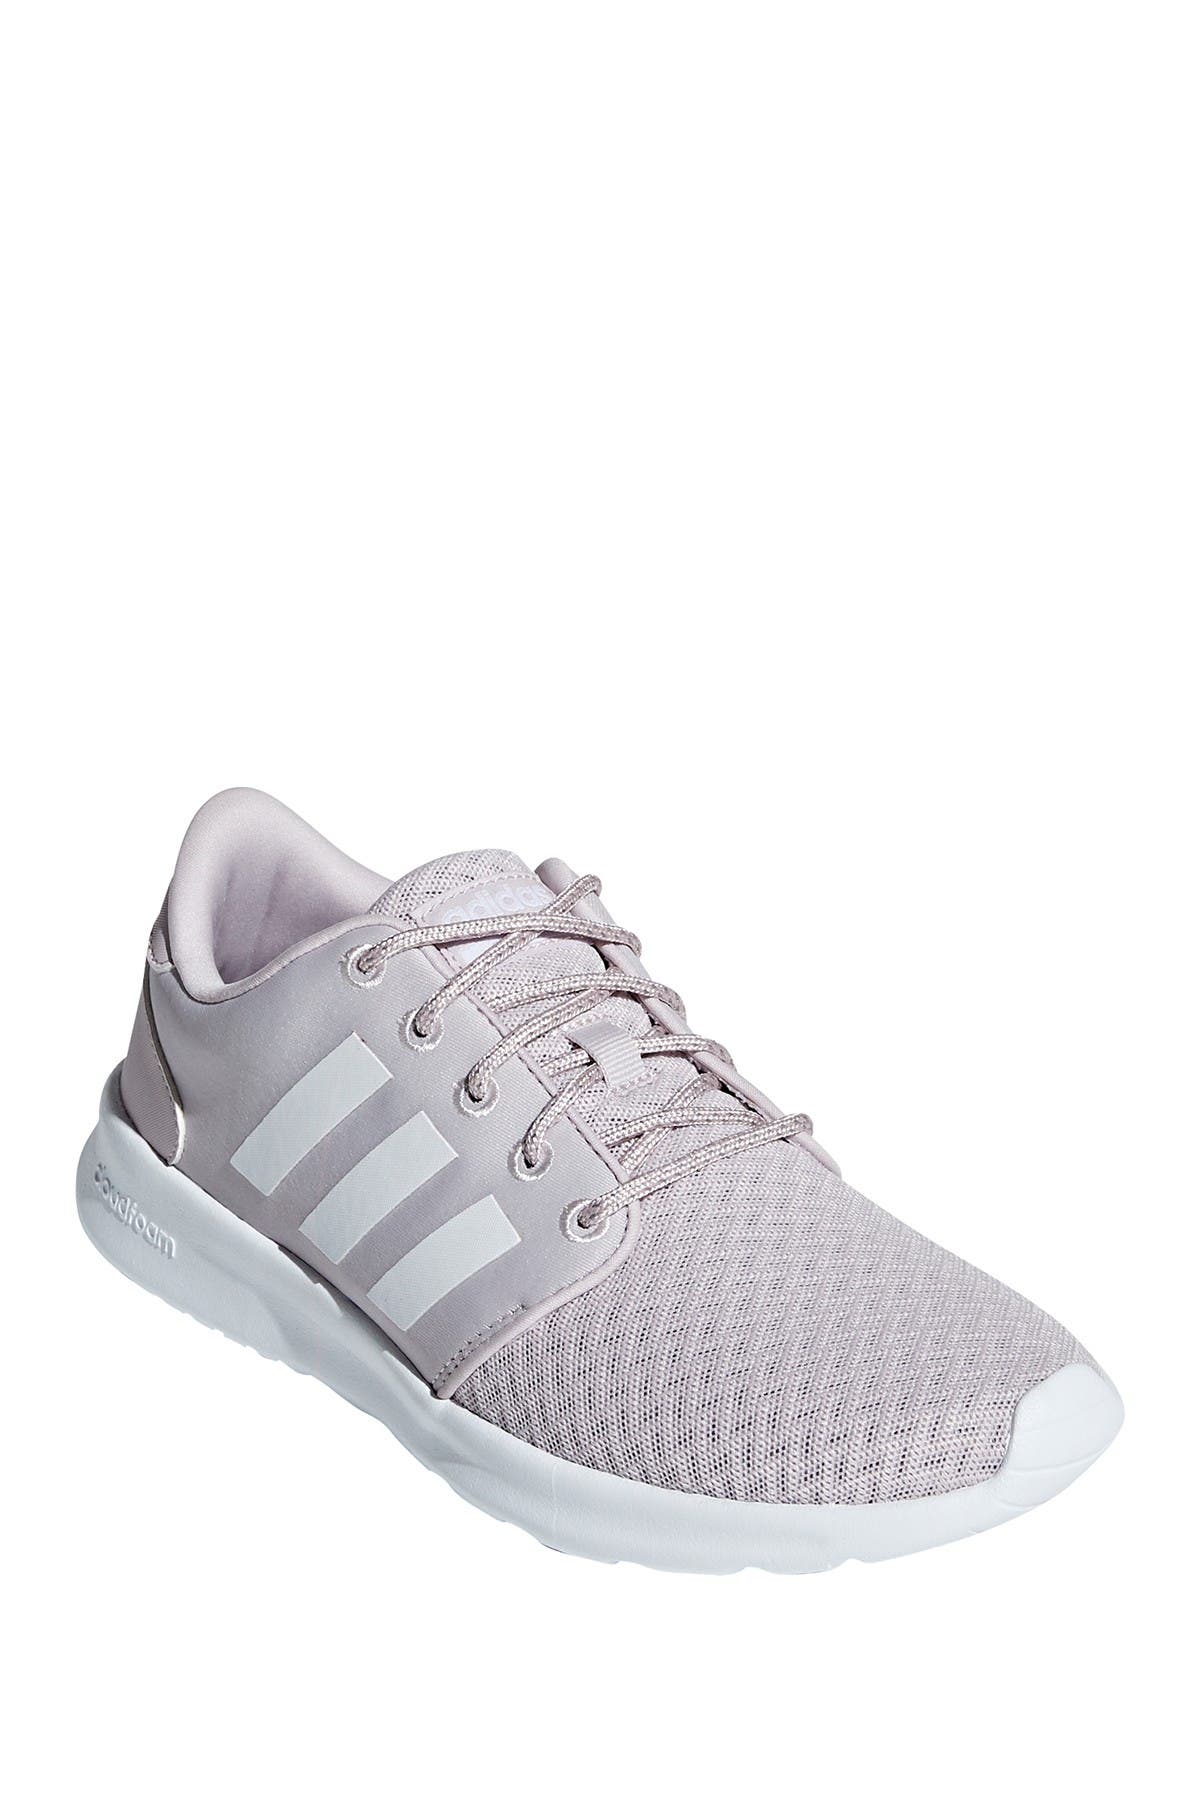 adidas | QT Racer White Sole Sneakers 